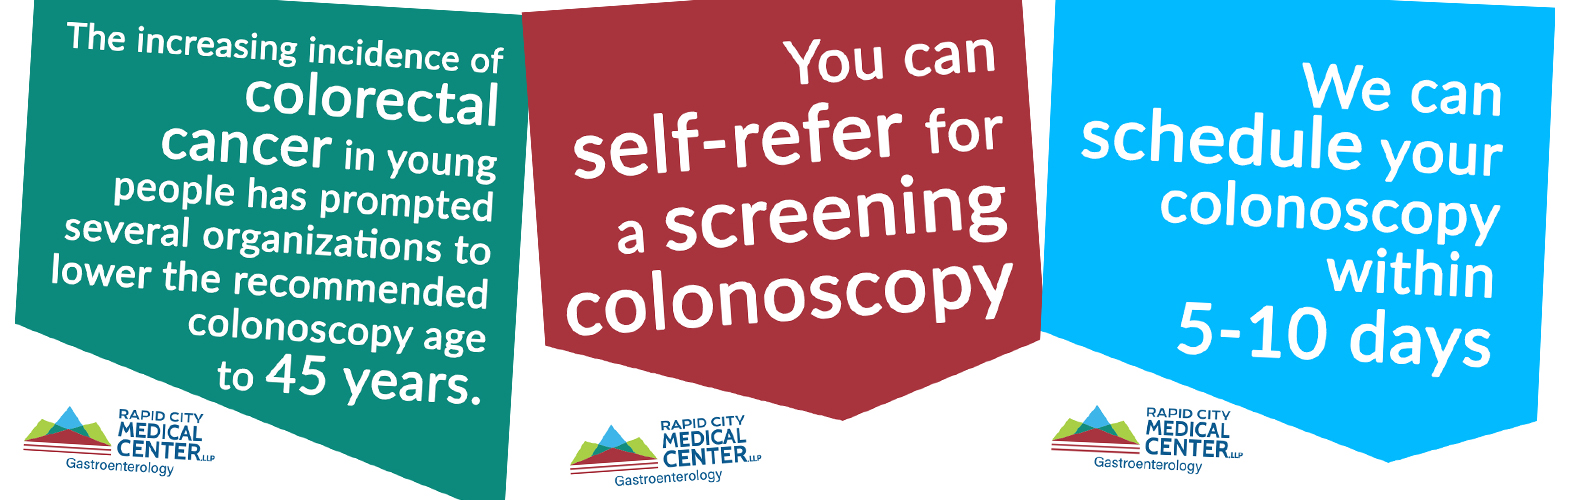 Colorectal Cancer Screening to Start at Age 45